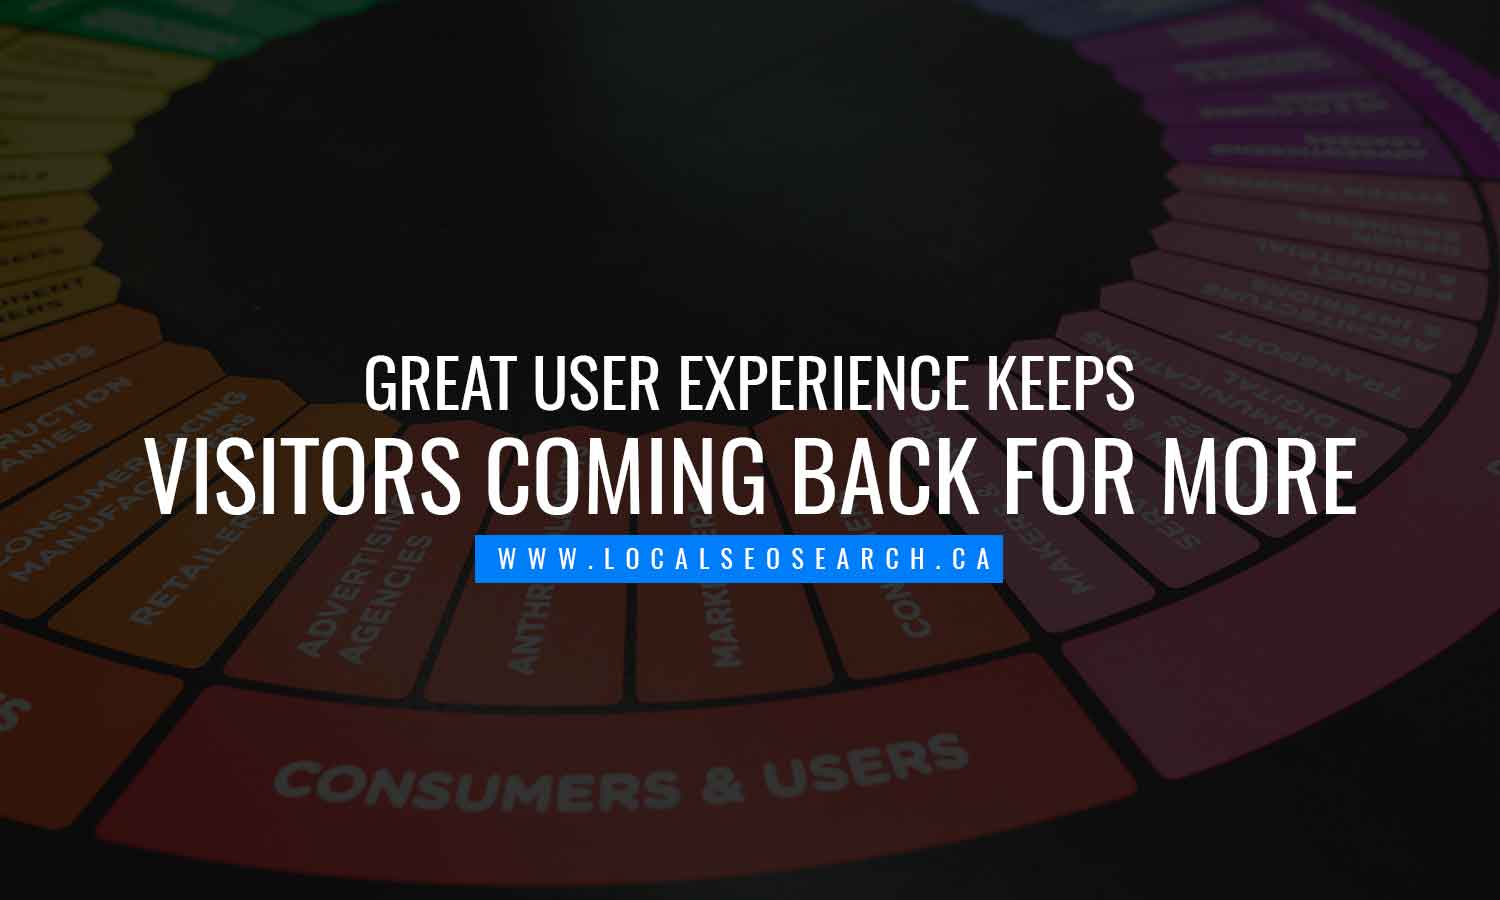 Great user experience keeps visitors coming back for more